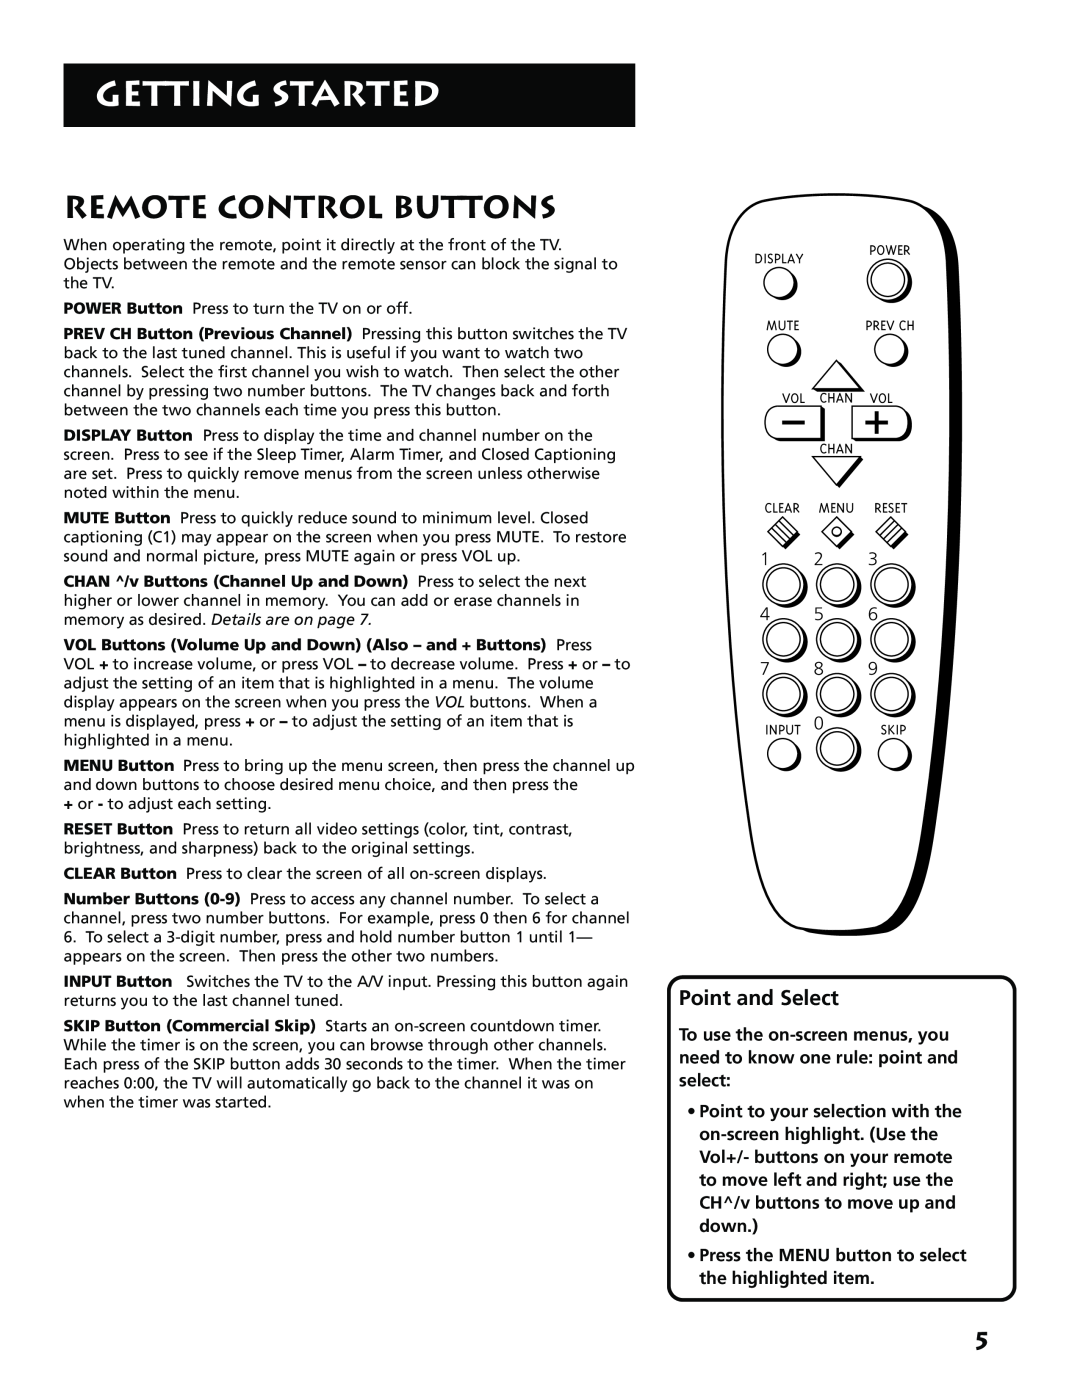 RCA E13341 Remote Control Buttons, Point and Select, Press the MENU button to select the highlighted item, Getting Started 